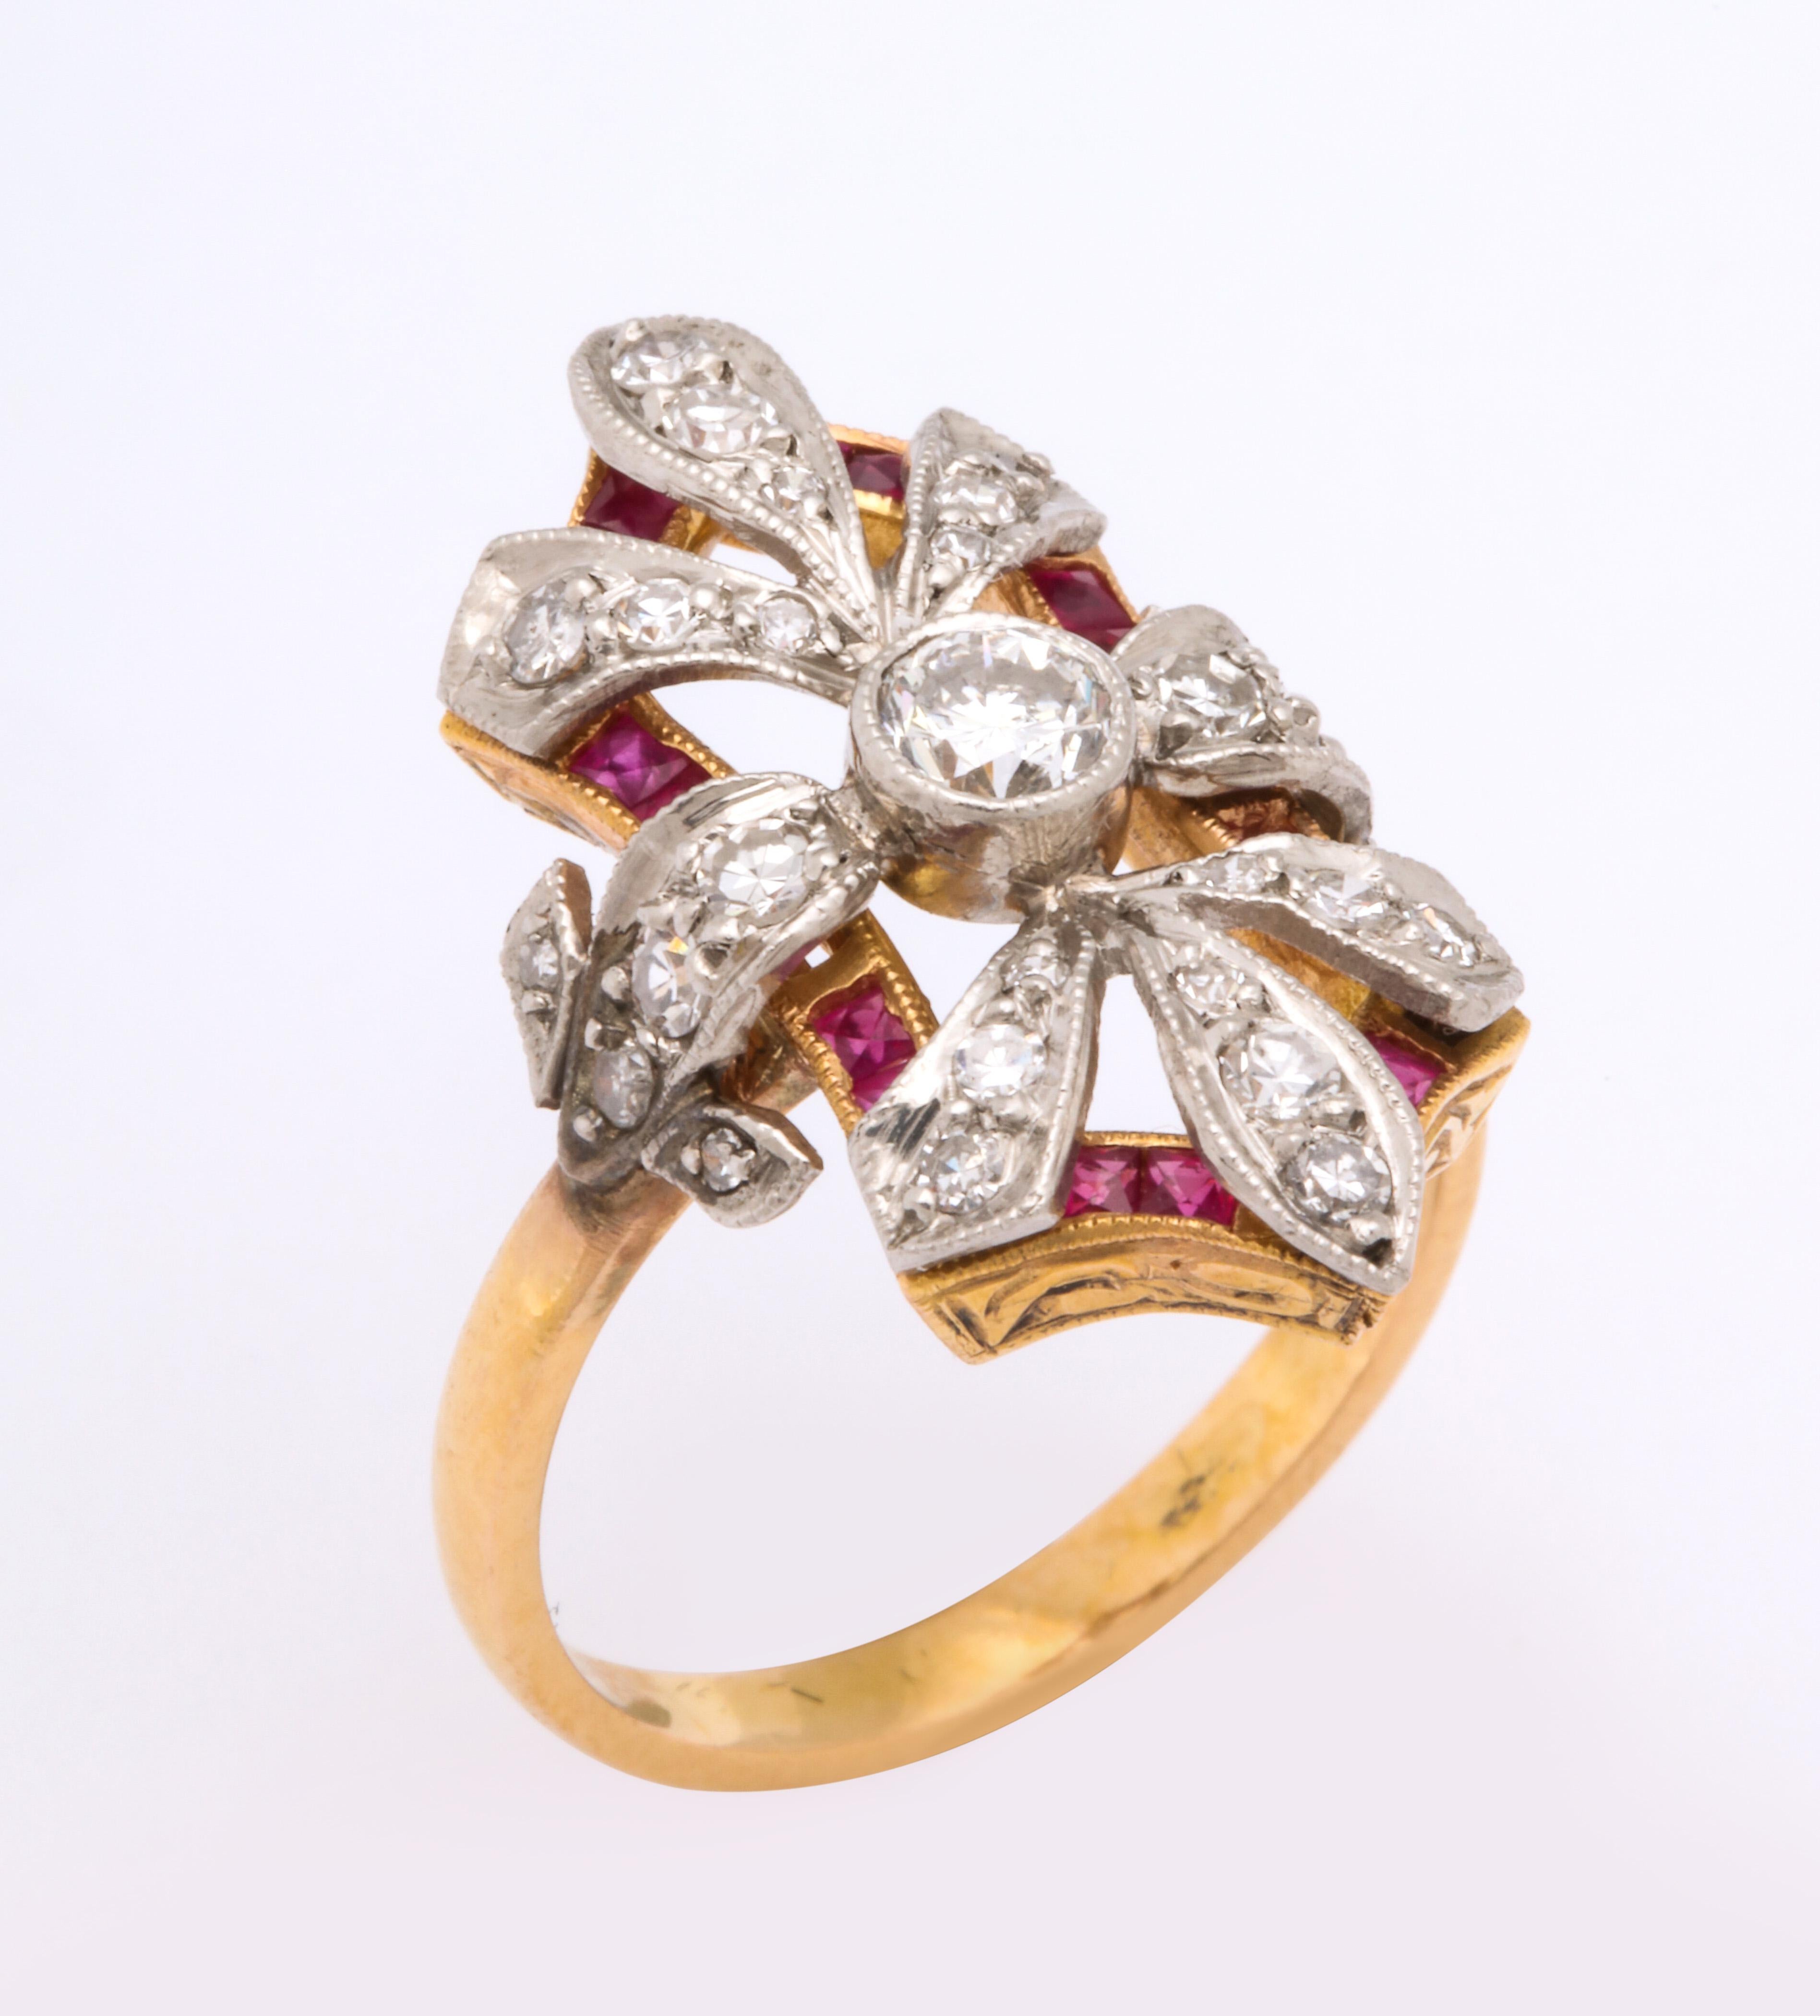 A great floral arrangement of diamonds with a ribbon of rubies supporting a white gold setting over a rose gold body